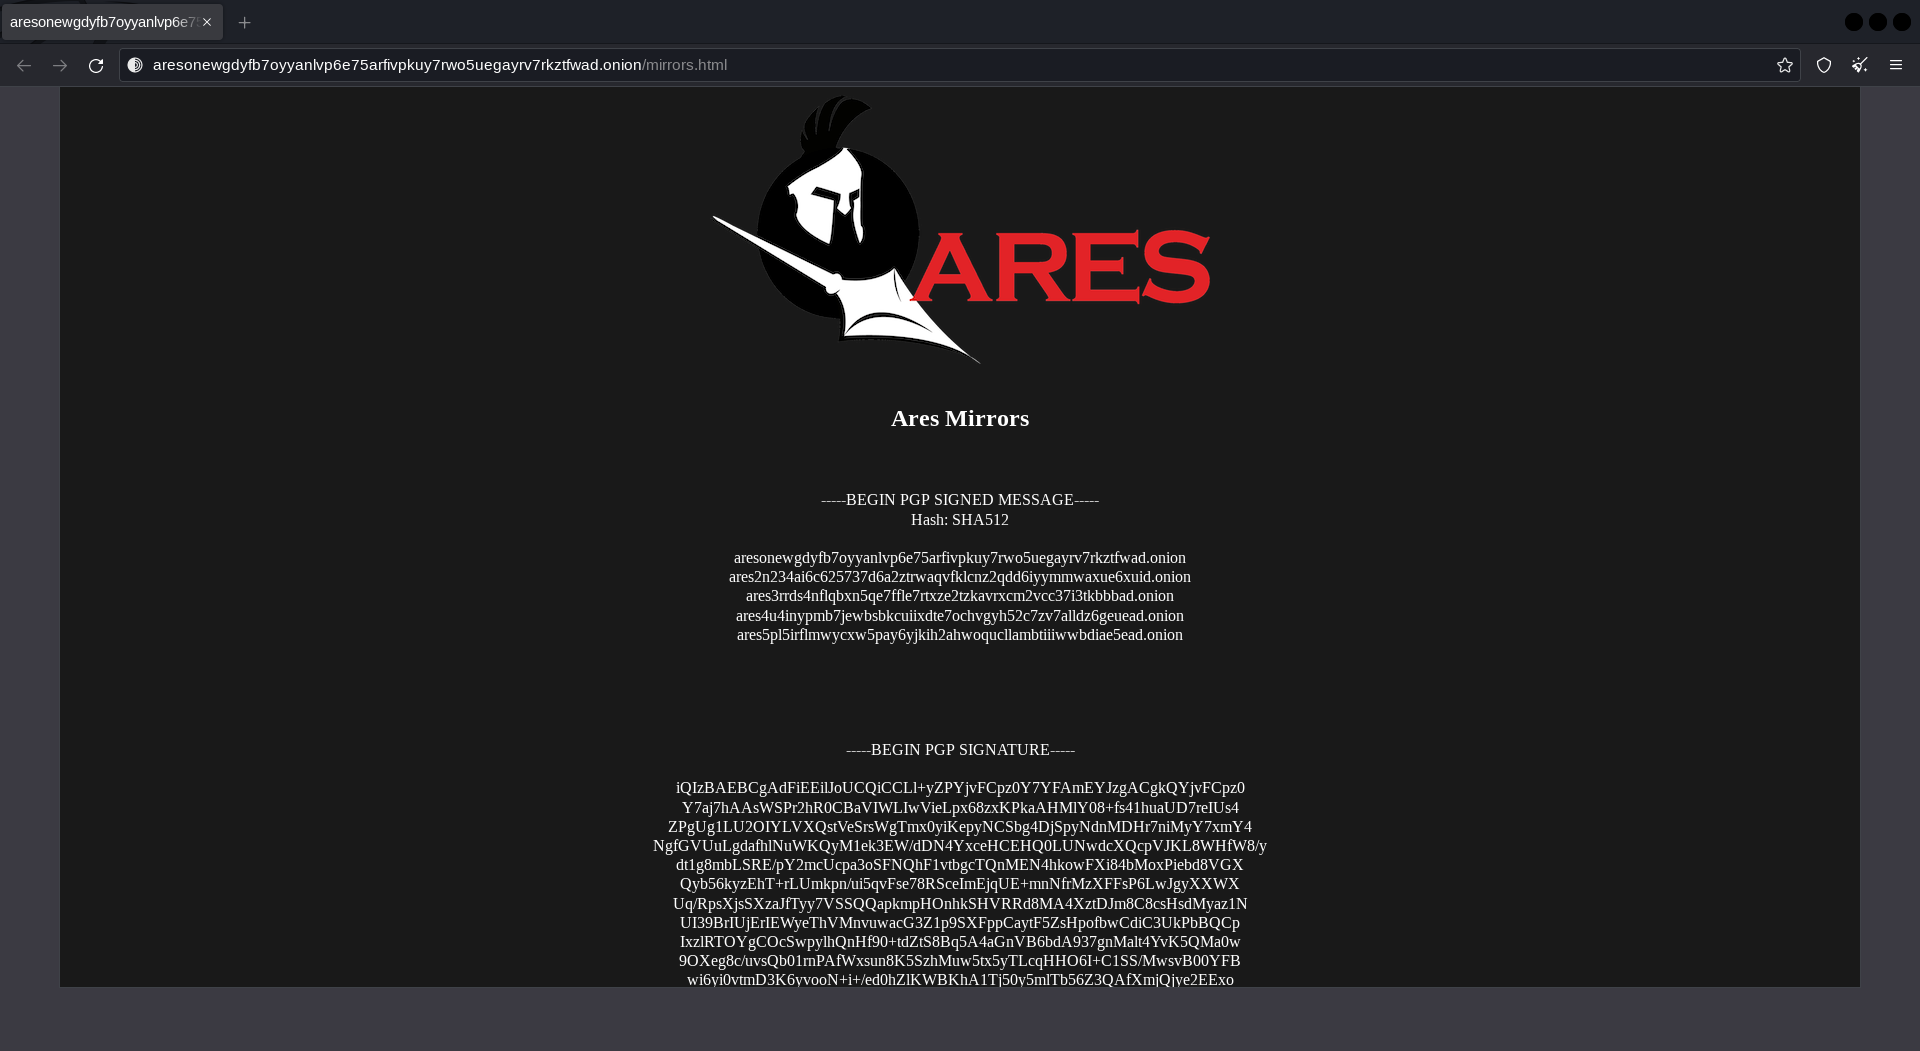 Ares darknet market about section 2